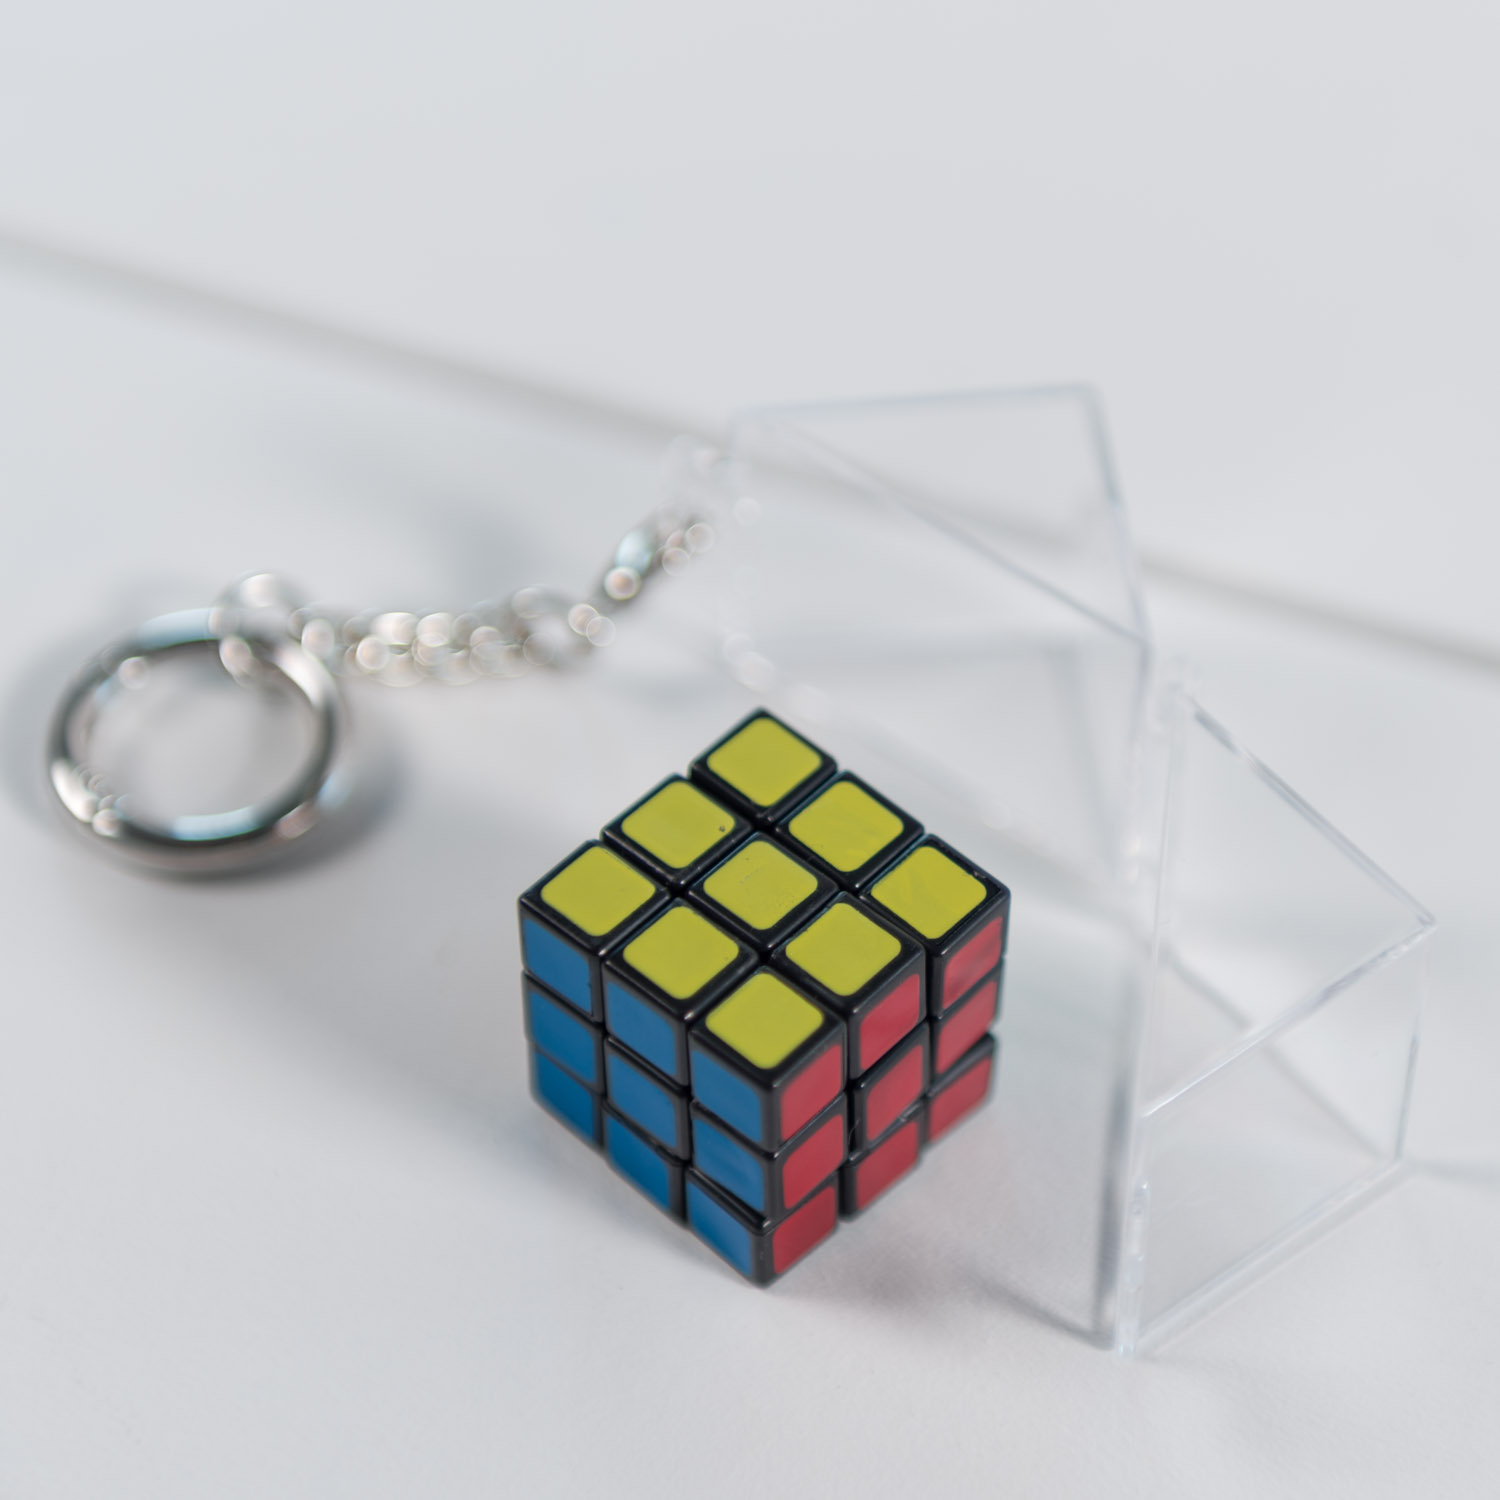 Worlds Smallest Rubik's Cube Puzzle Game